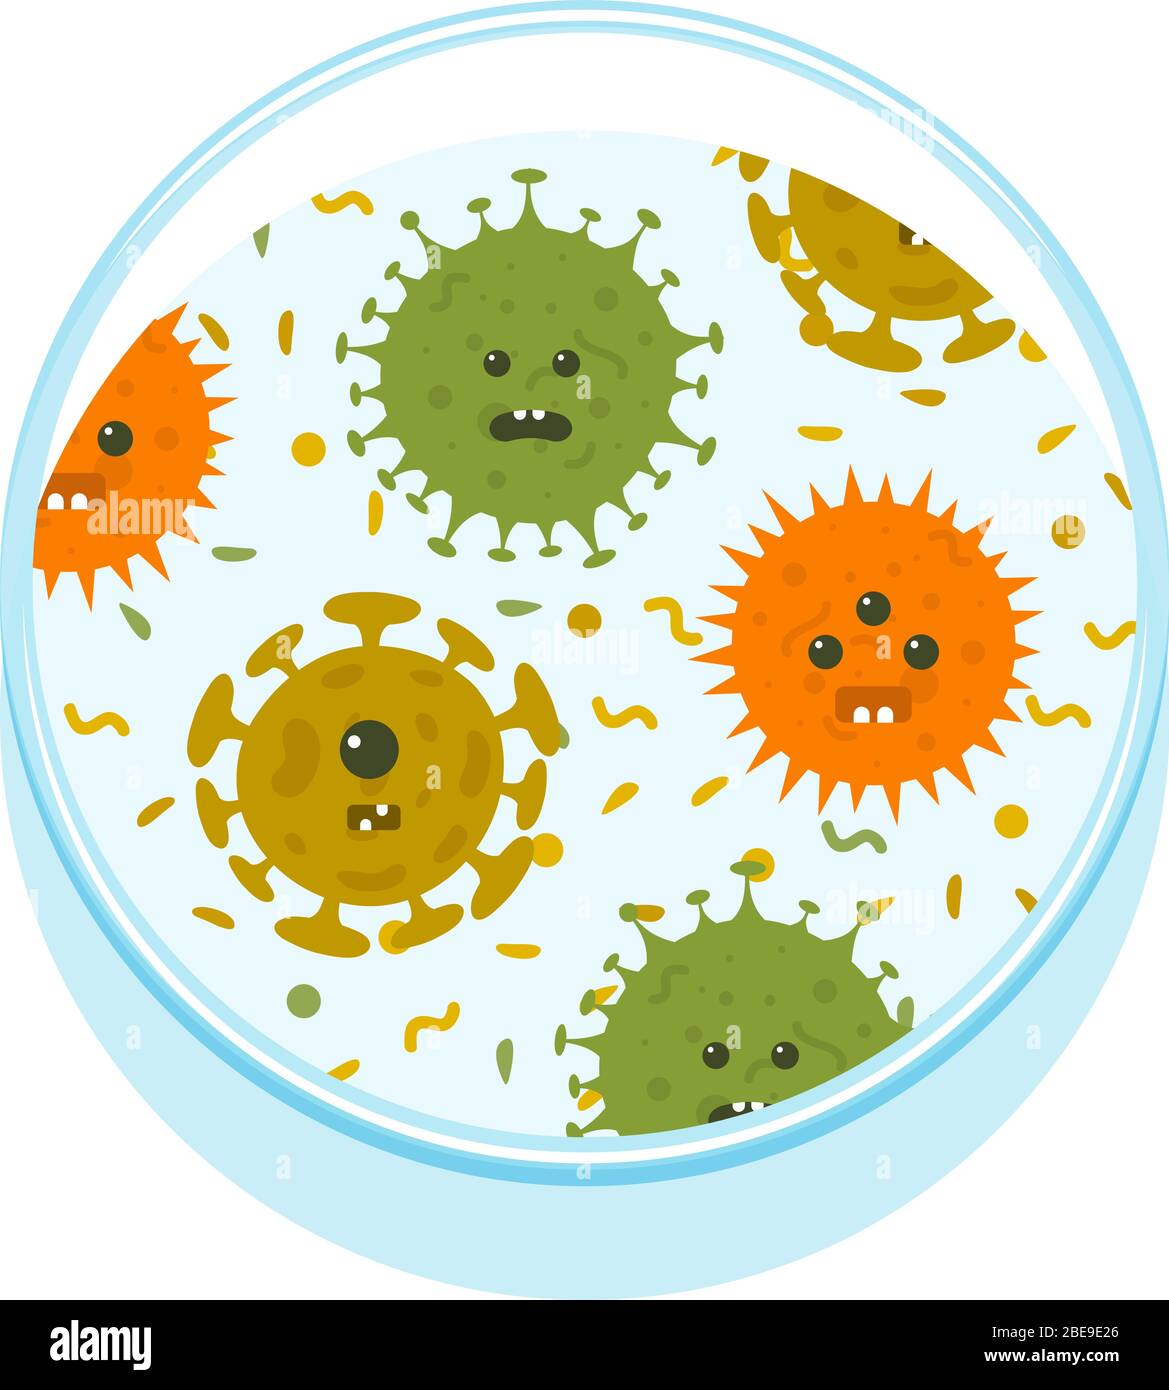 Petri dish with cartoon microbes. Bacteria and virus microbiology, vector illustration Stock Vector